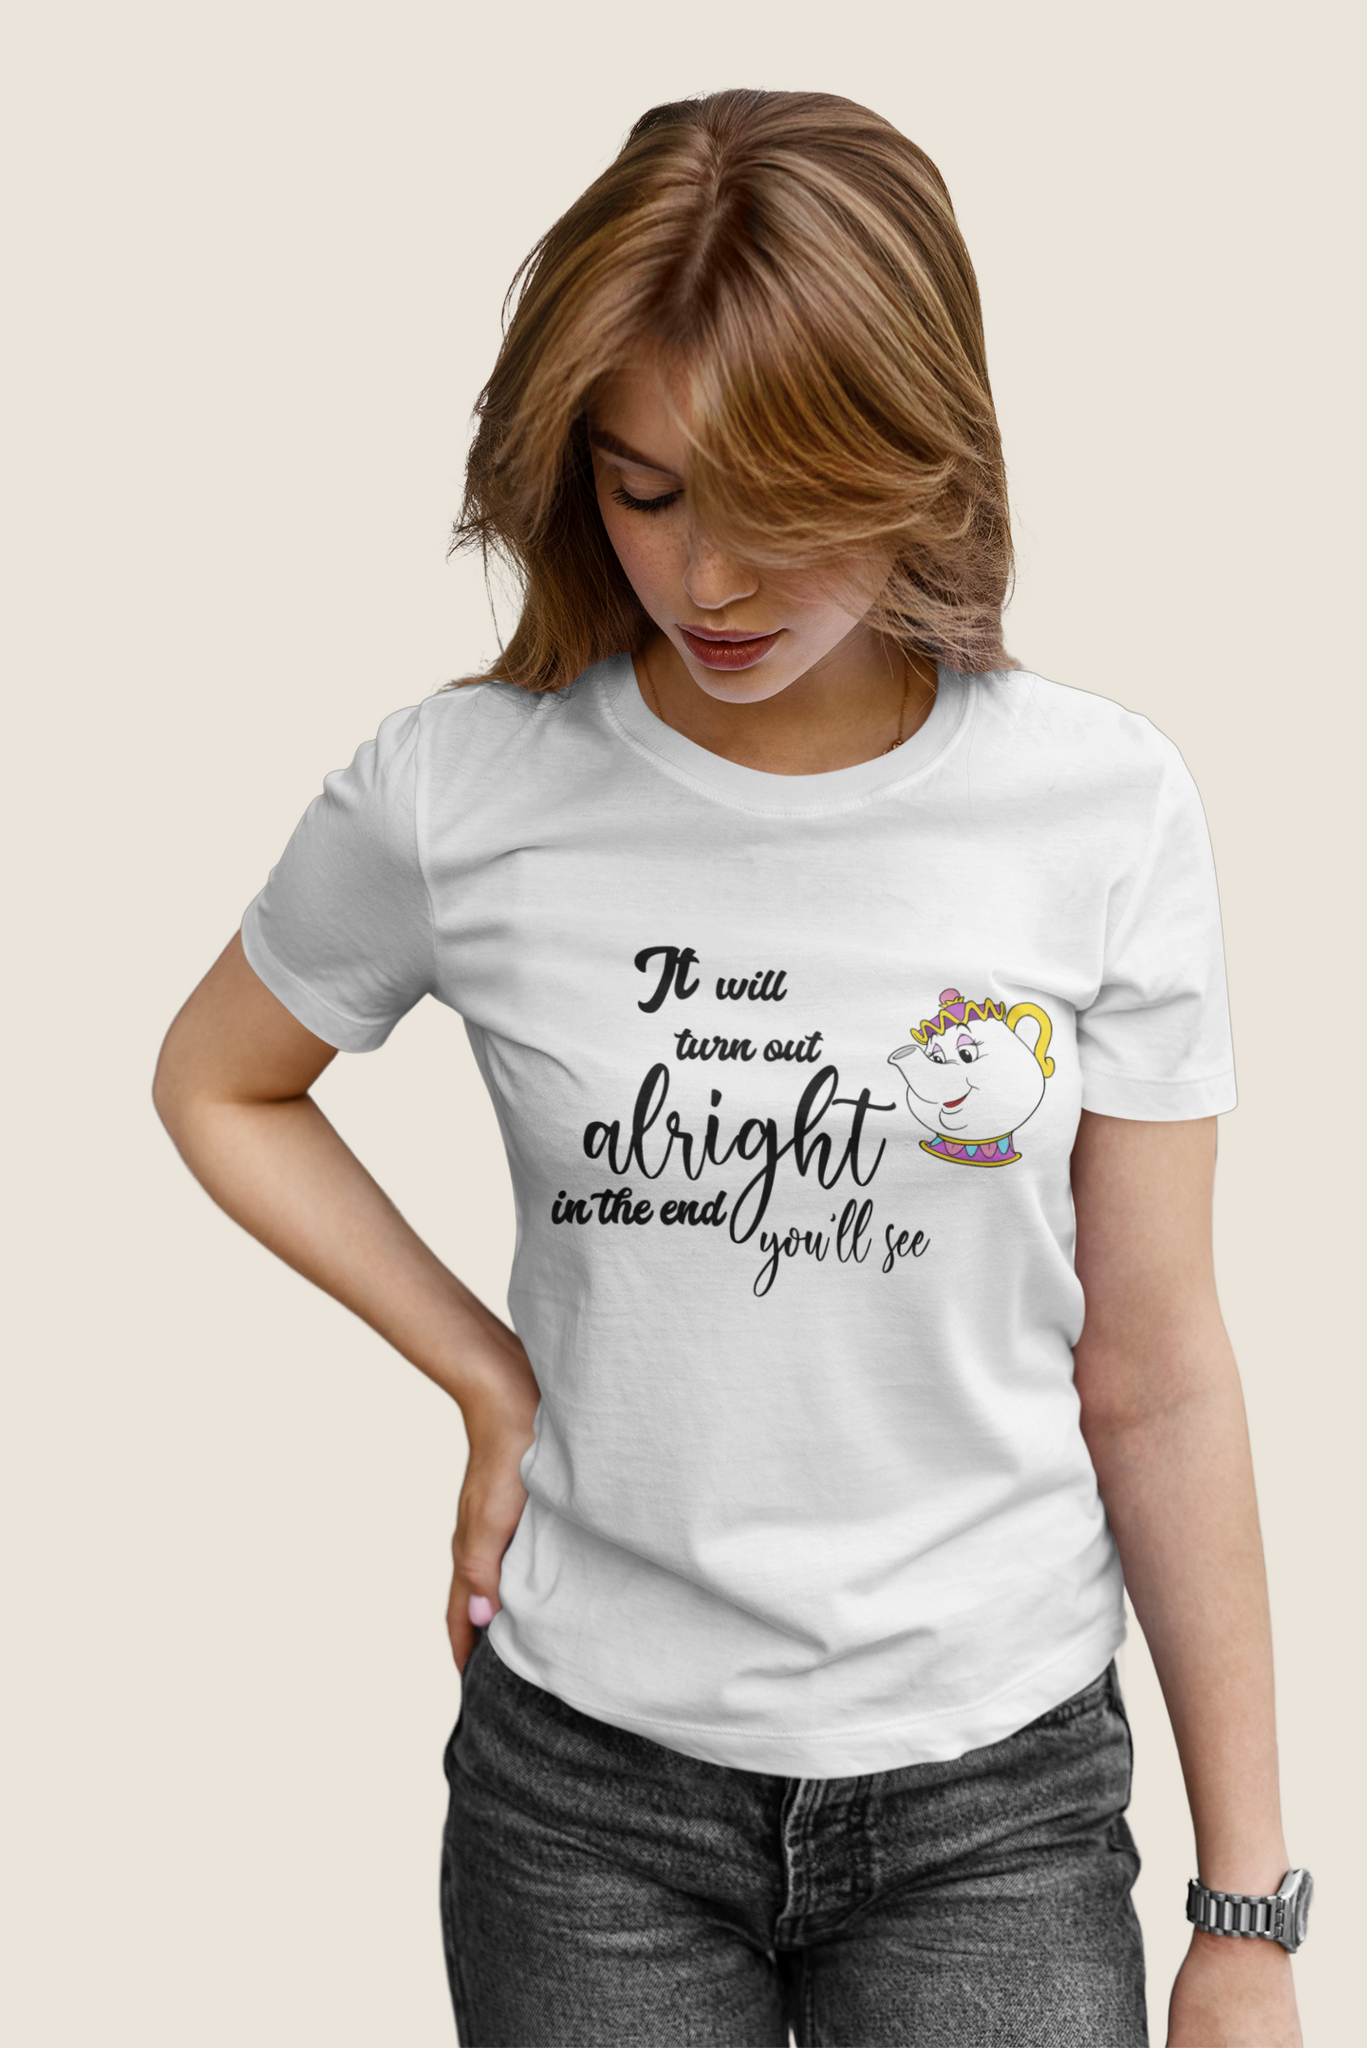 Disney Beauty And The Beast T Shirt, Mrs Potts T Shirt, It Will Turn Out Alright In The End Youll See Tshirt